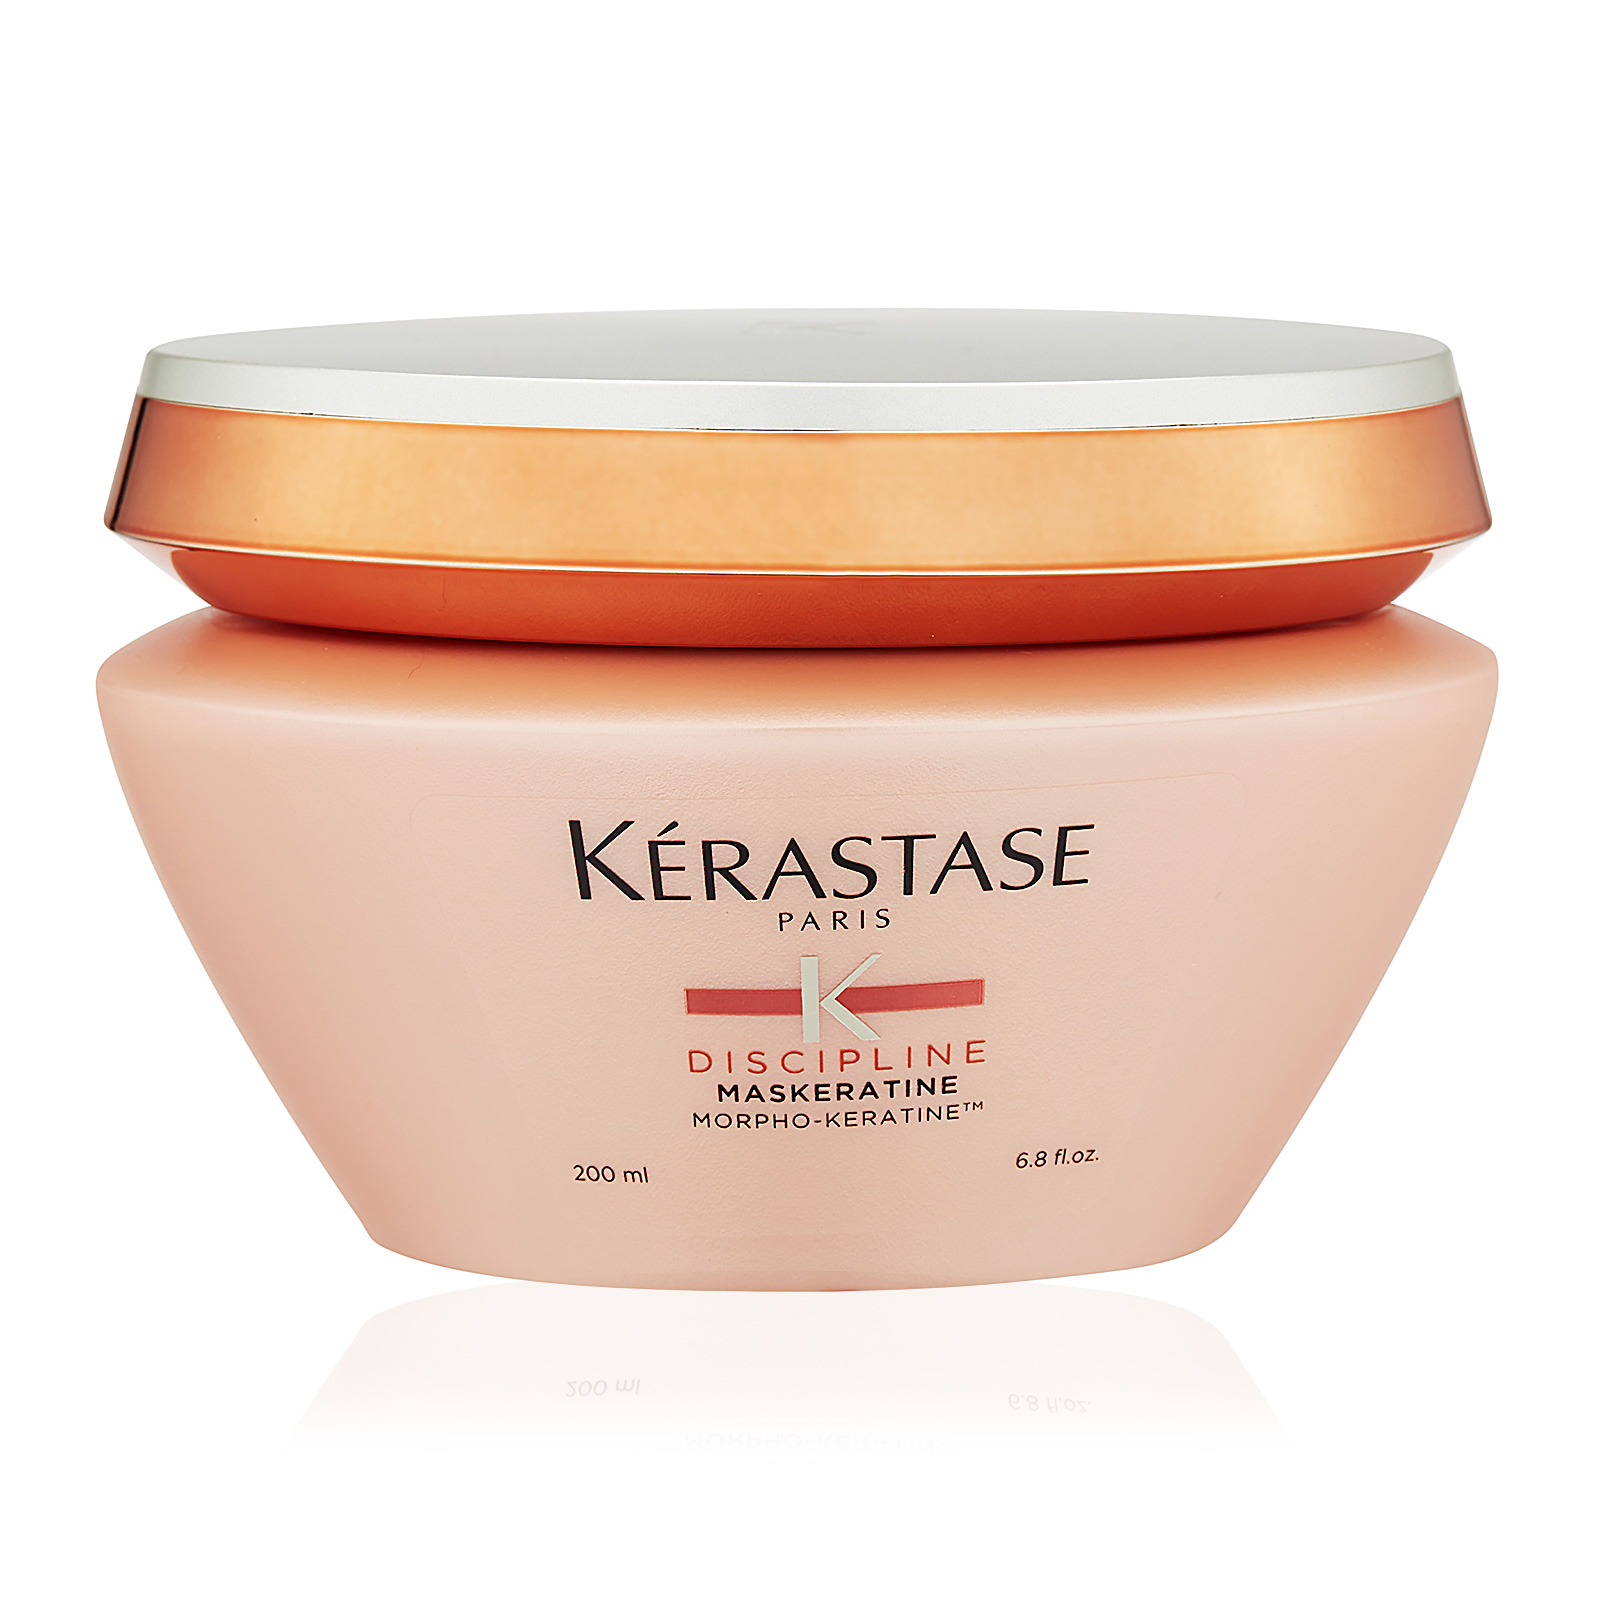 Disipline Maskeratine Smooth-In-Motion Masque - High Concentration (For Unruly, Rebellious Hair)